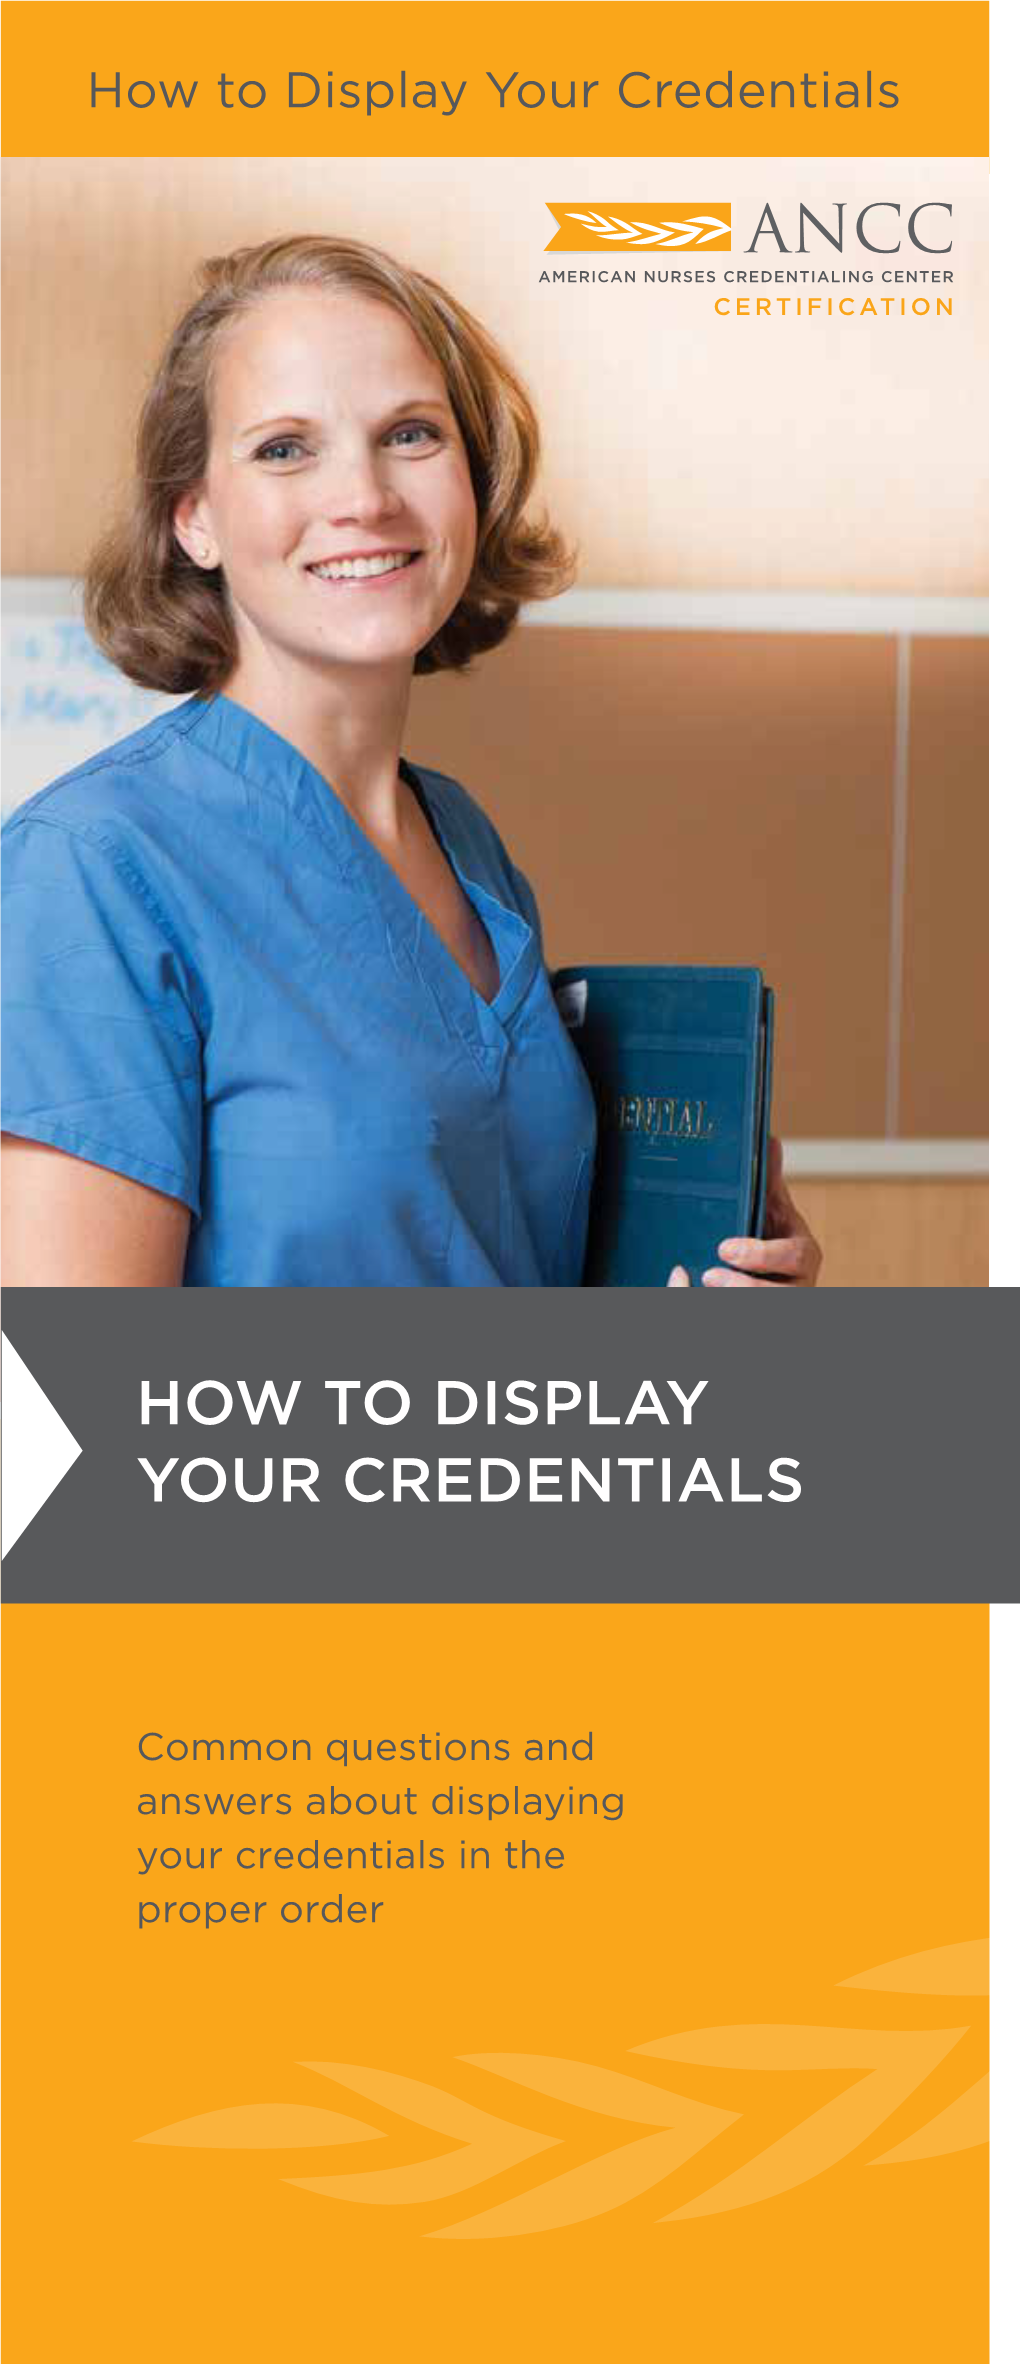 How to Display Your Credentials